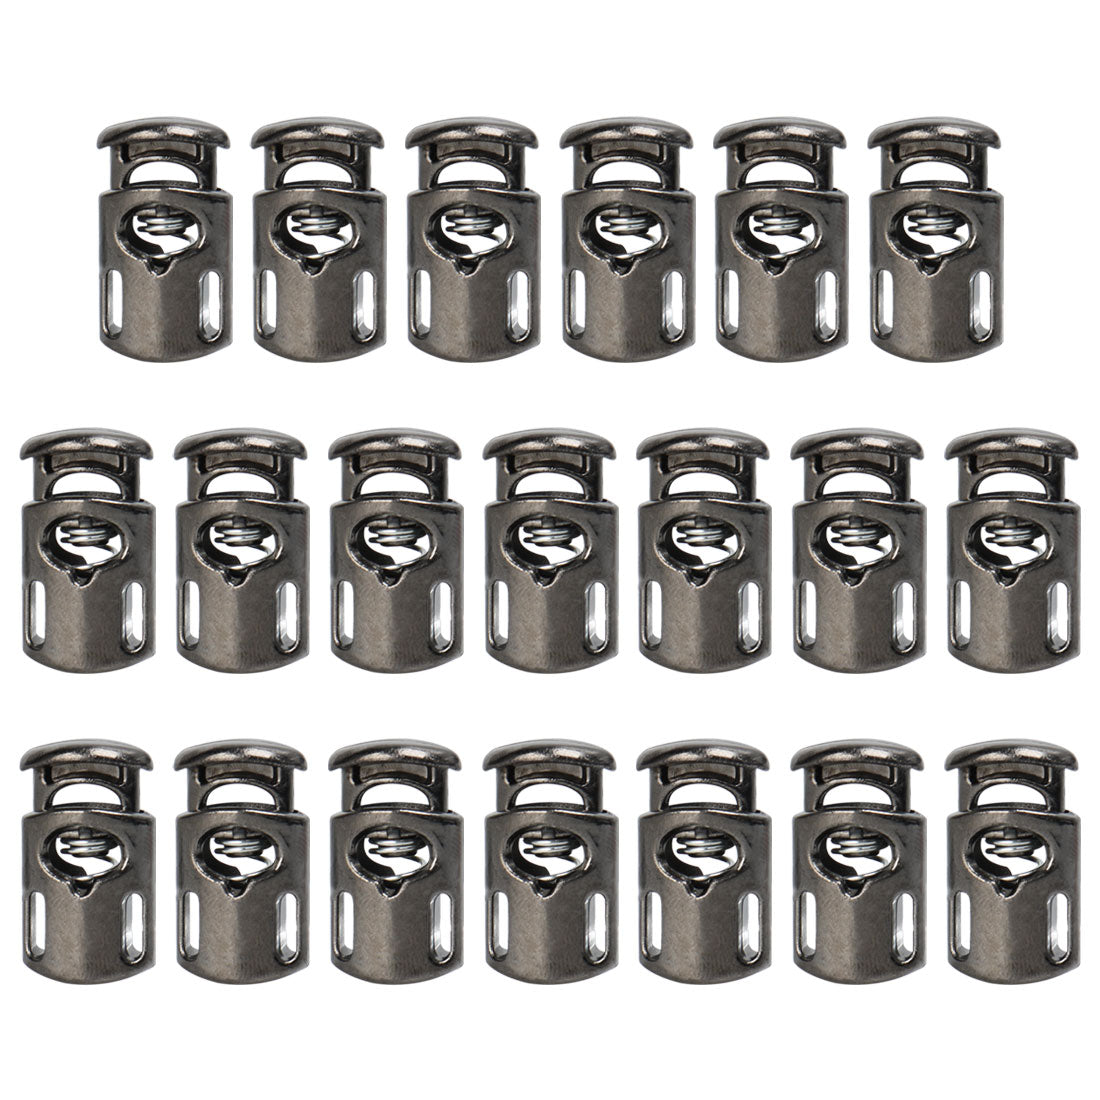 uxcell Uxcell 20pcs Plastic Cord Lock Stopper Spring Toggle Fastener Organizer Silver Black